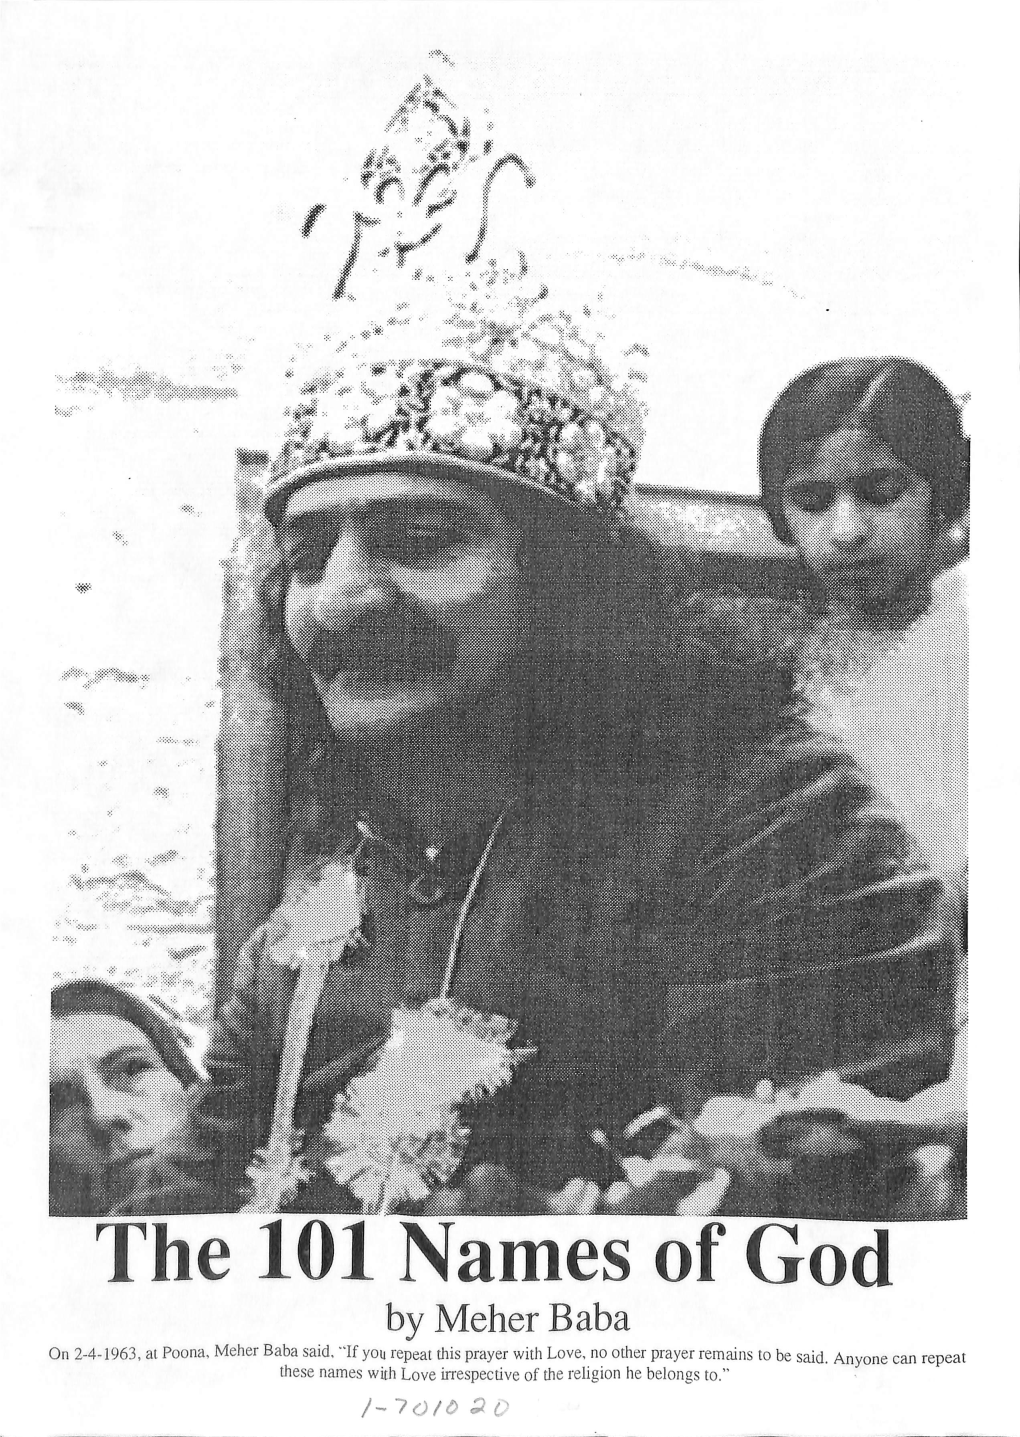 The 101 Names of God by Meher Baba on 2-4-1963, at Poona, Meher Baba Said